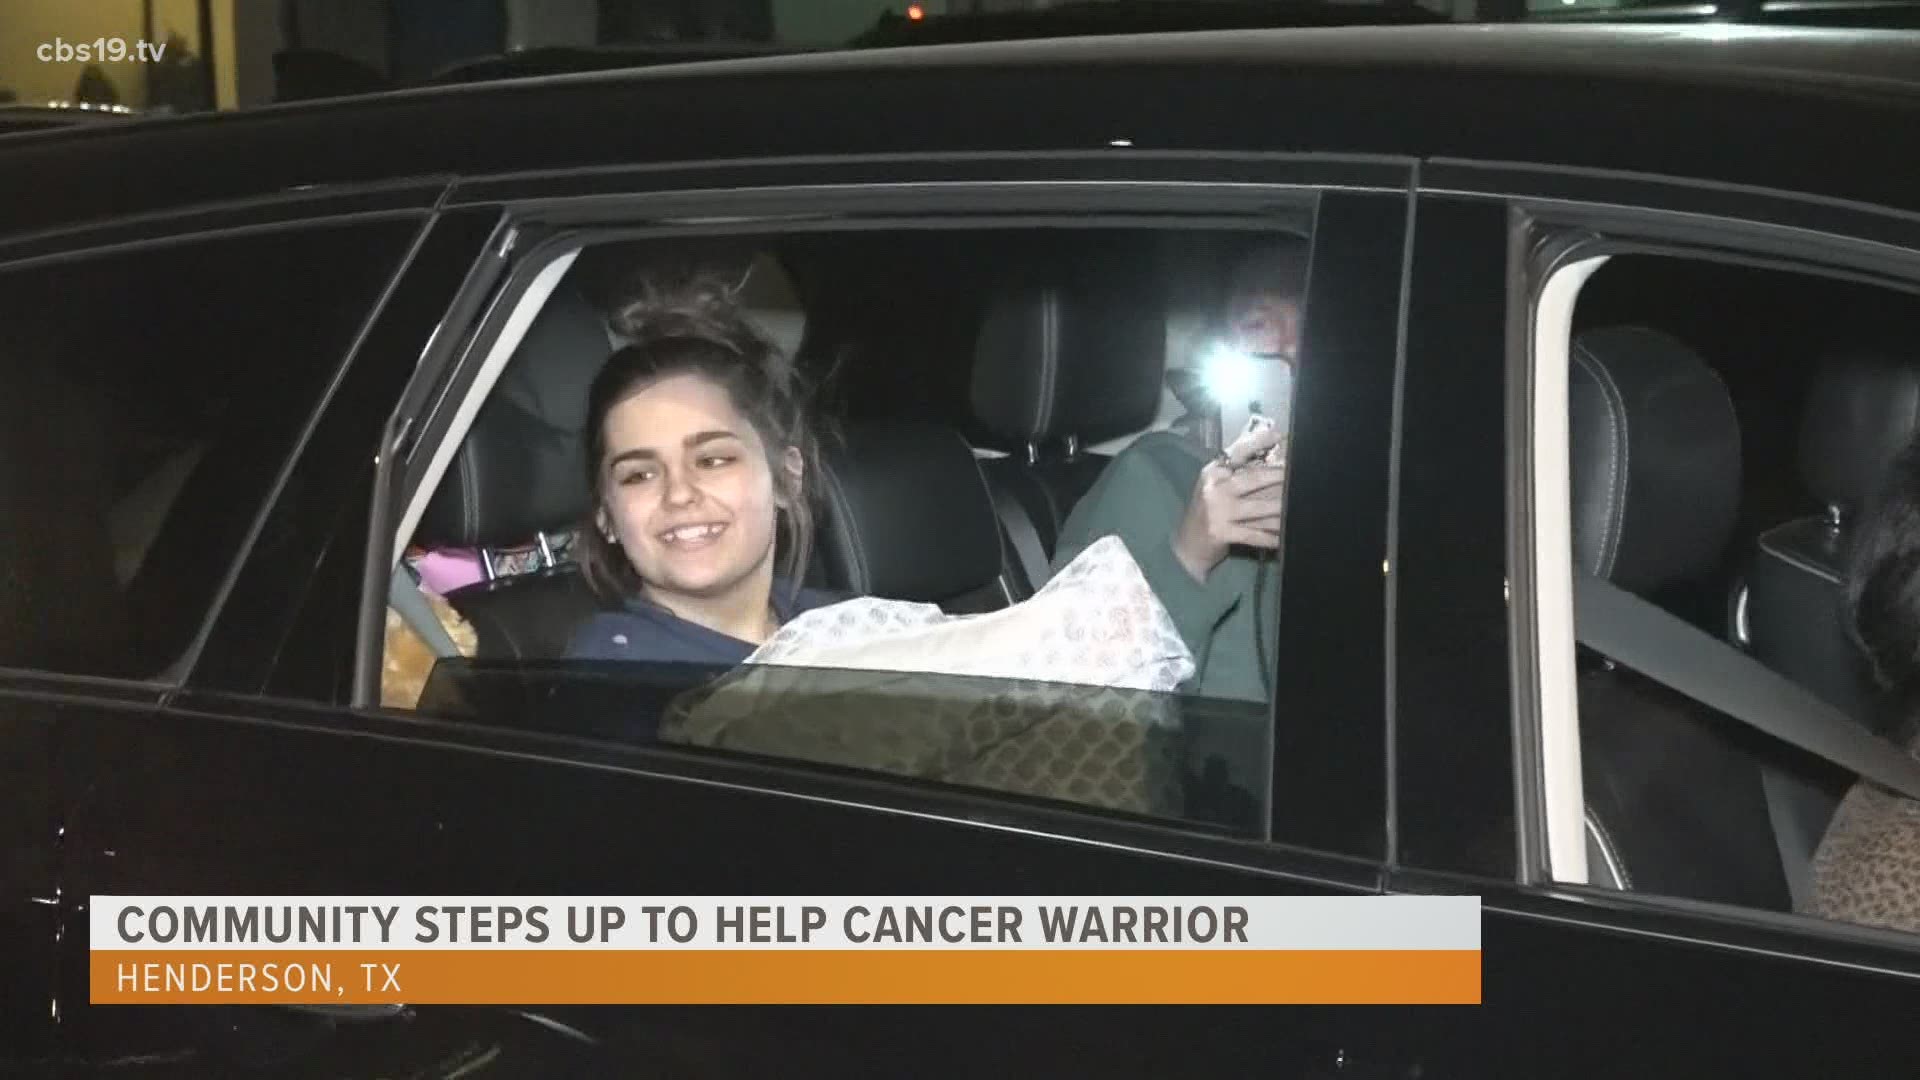 The Henderson community gathered Monday night to welcome home their leukemia warrior Addison Graham, a 14-year old girl who was diagnosed last Thursday.